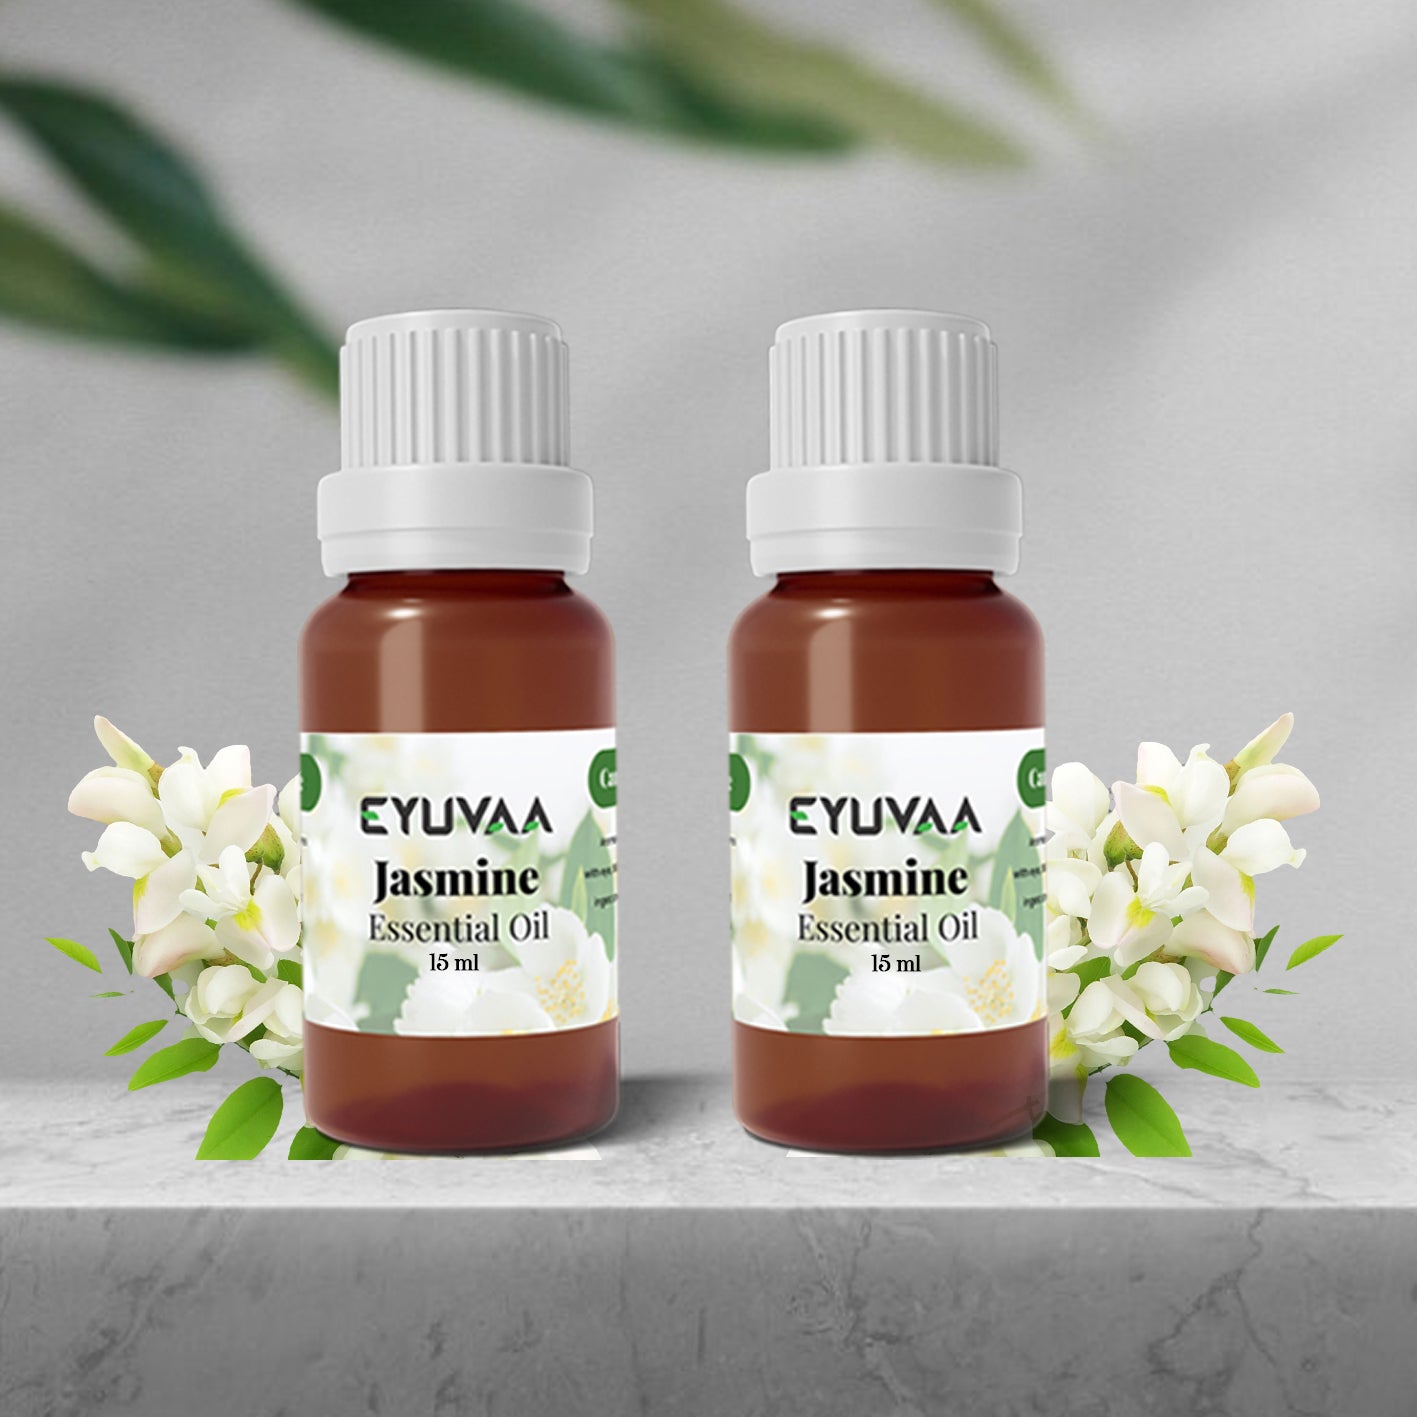 15 Ml  Essential oil, Fragrance oil, Aromatherapy Oil for Home care, Aroma Oil for home fragrance, Essential oil for candle-making, Spa treatments